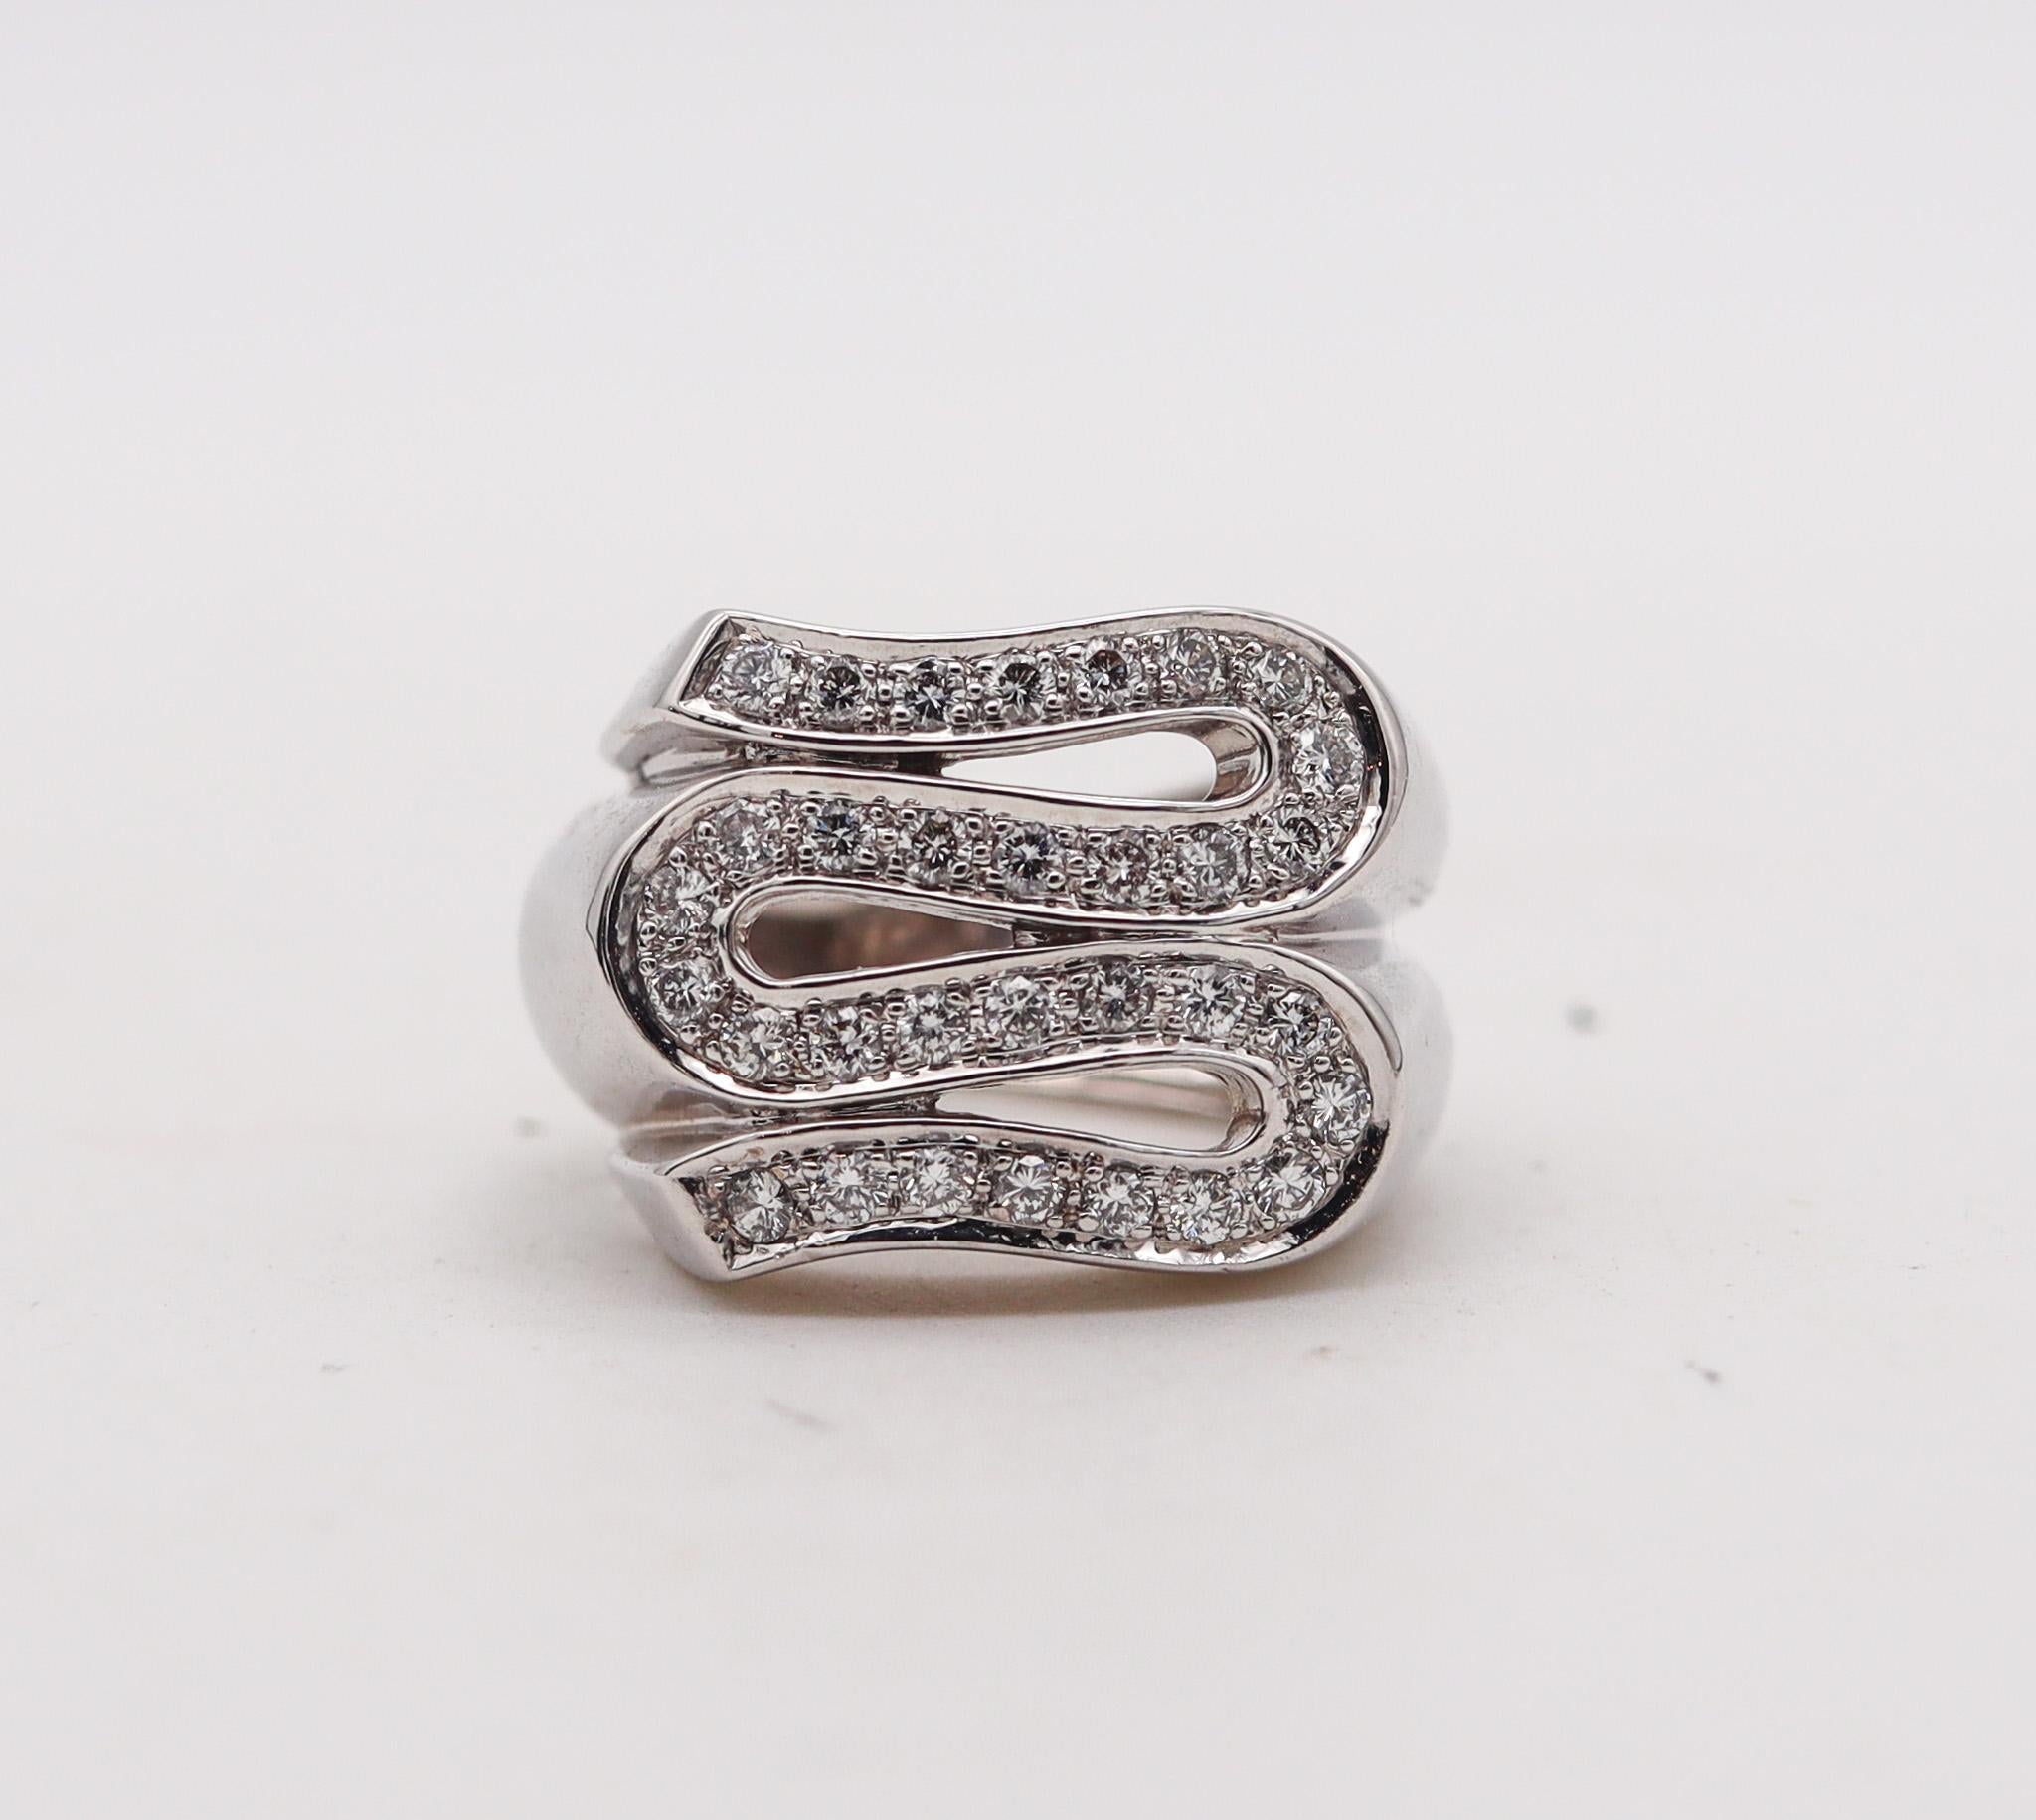 Modernist Gianni Versace 1990 Cocktail Ring In 18Kt White Gold With 1.03 Ctw In Diamonds For Sale